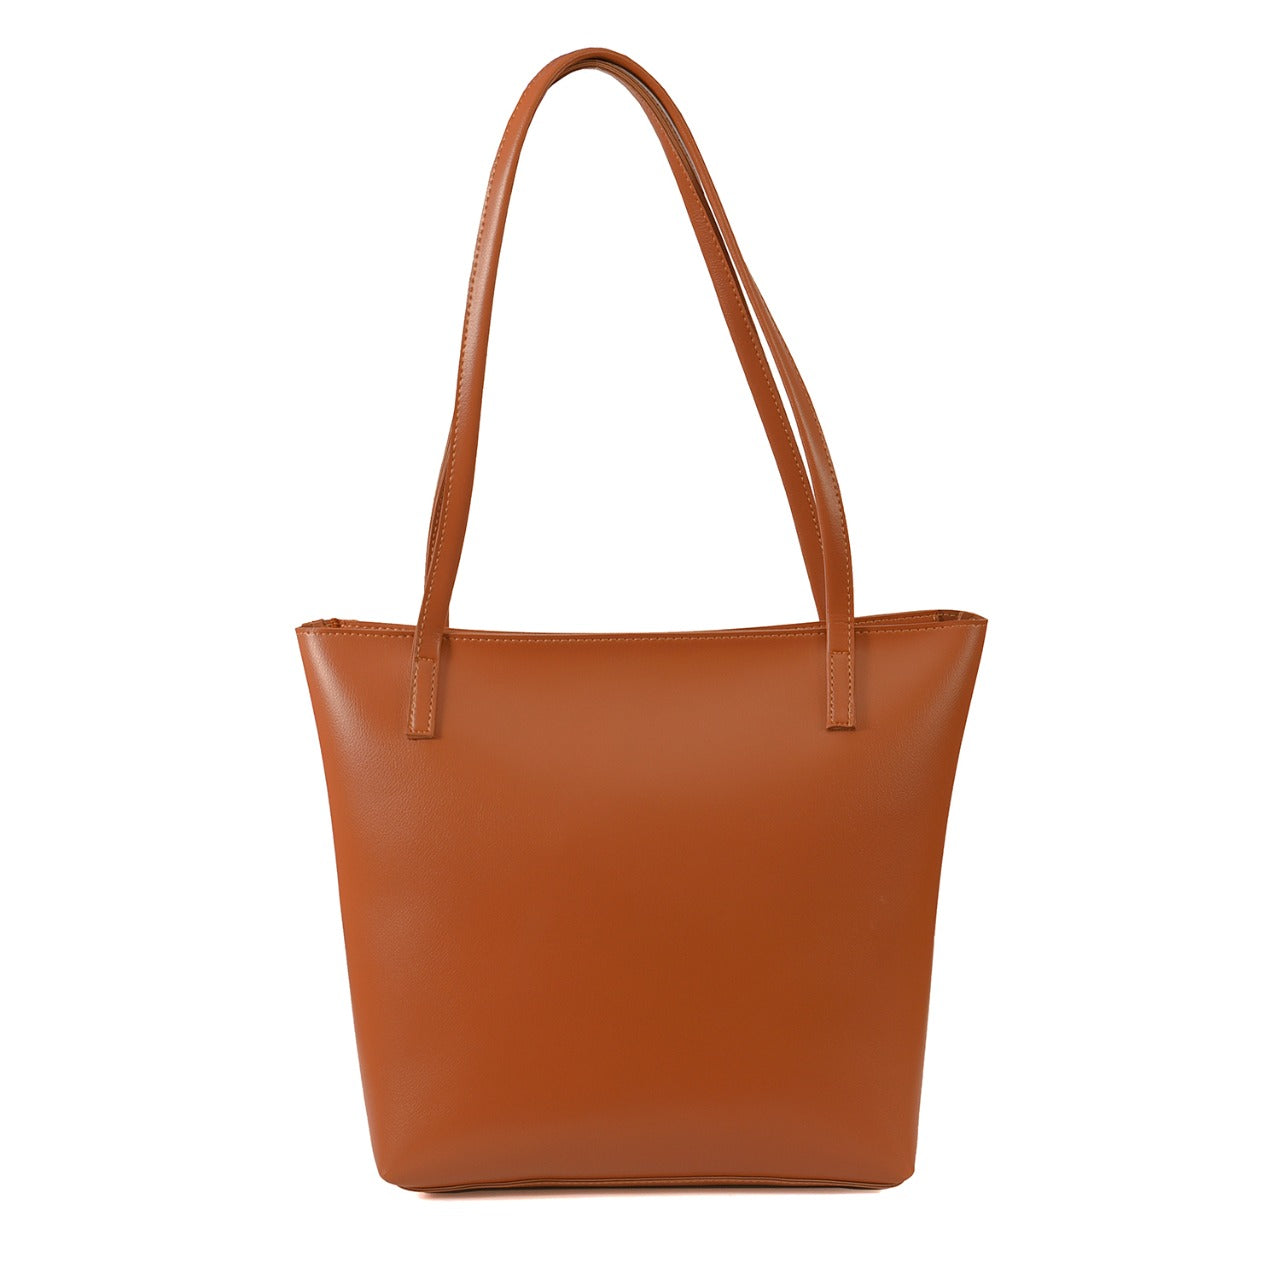 INFINITY TOTE BROWN